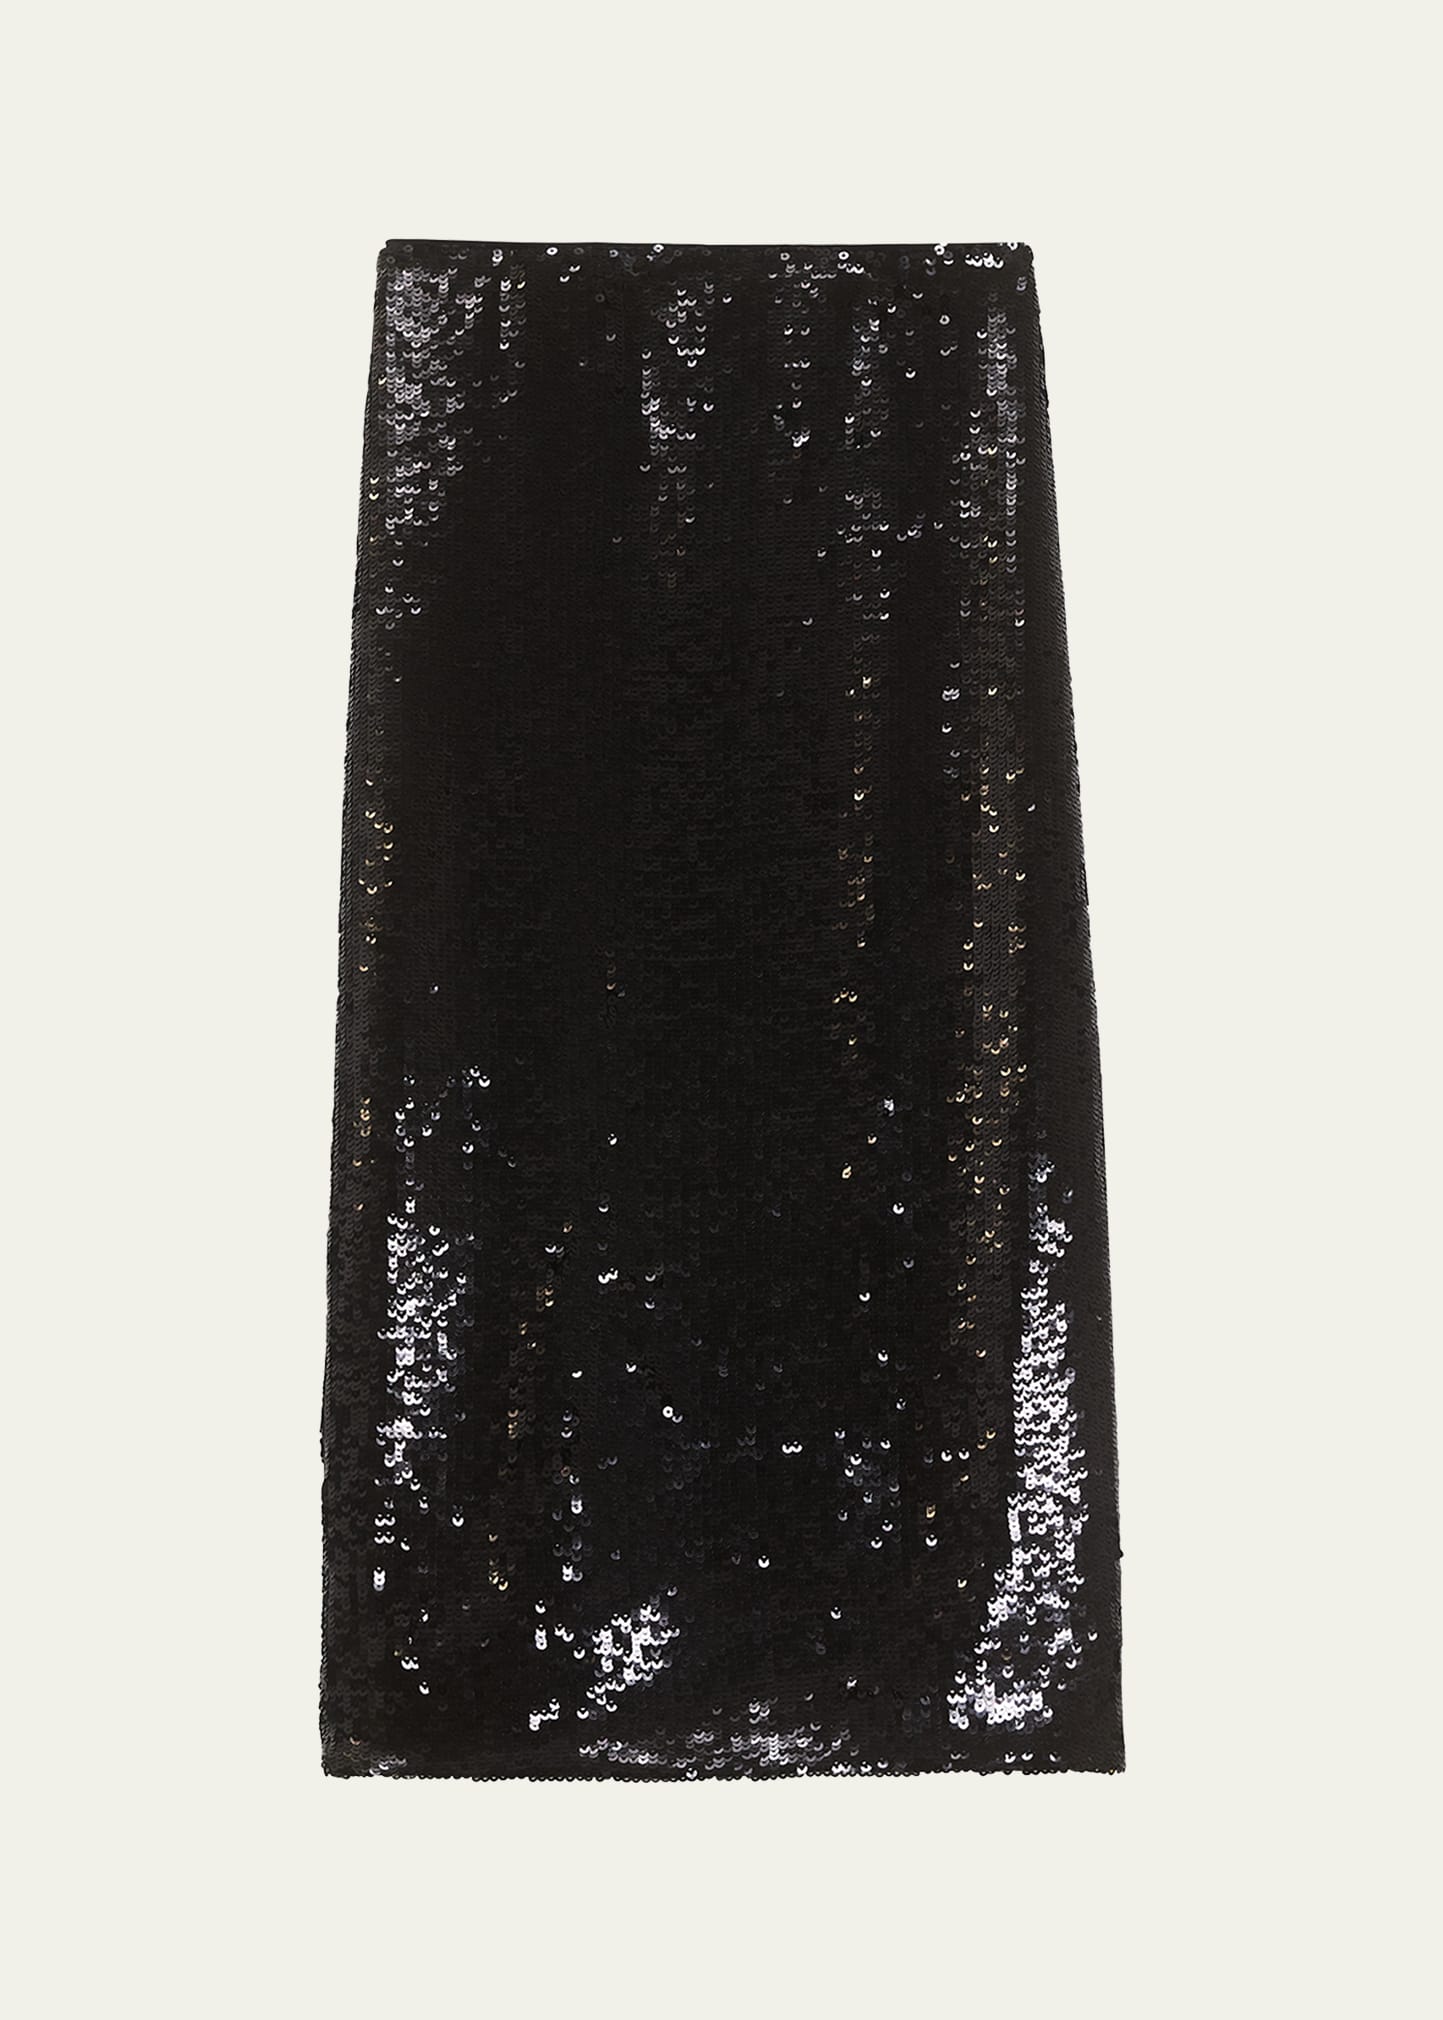 THEORY SEQUIN PENCIL SKIRT